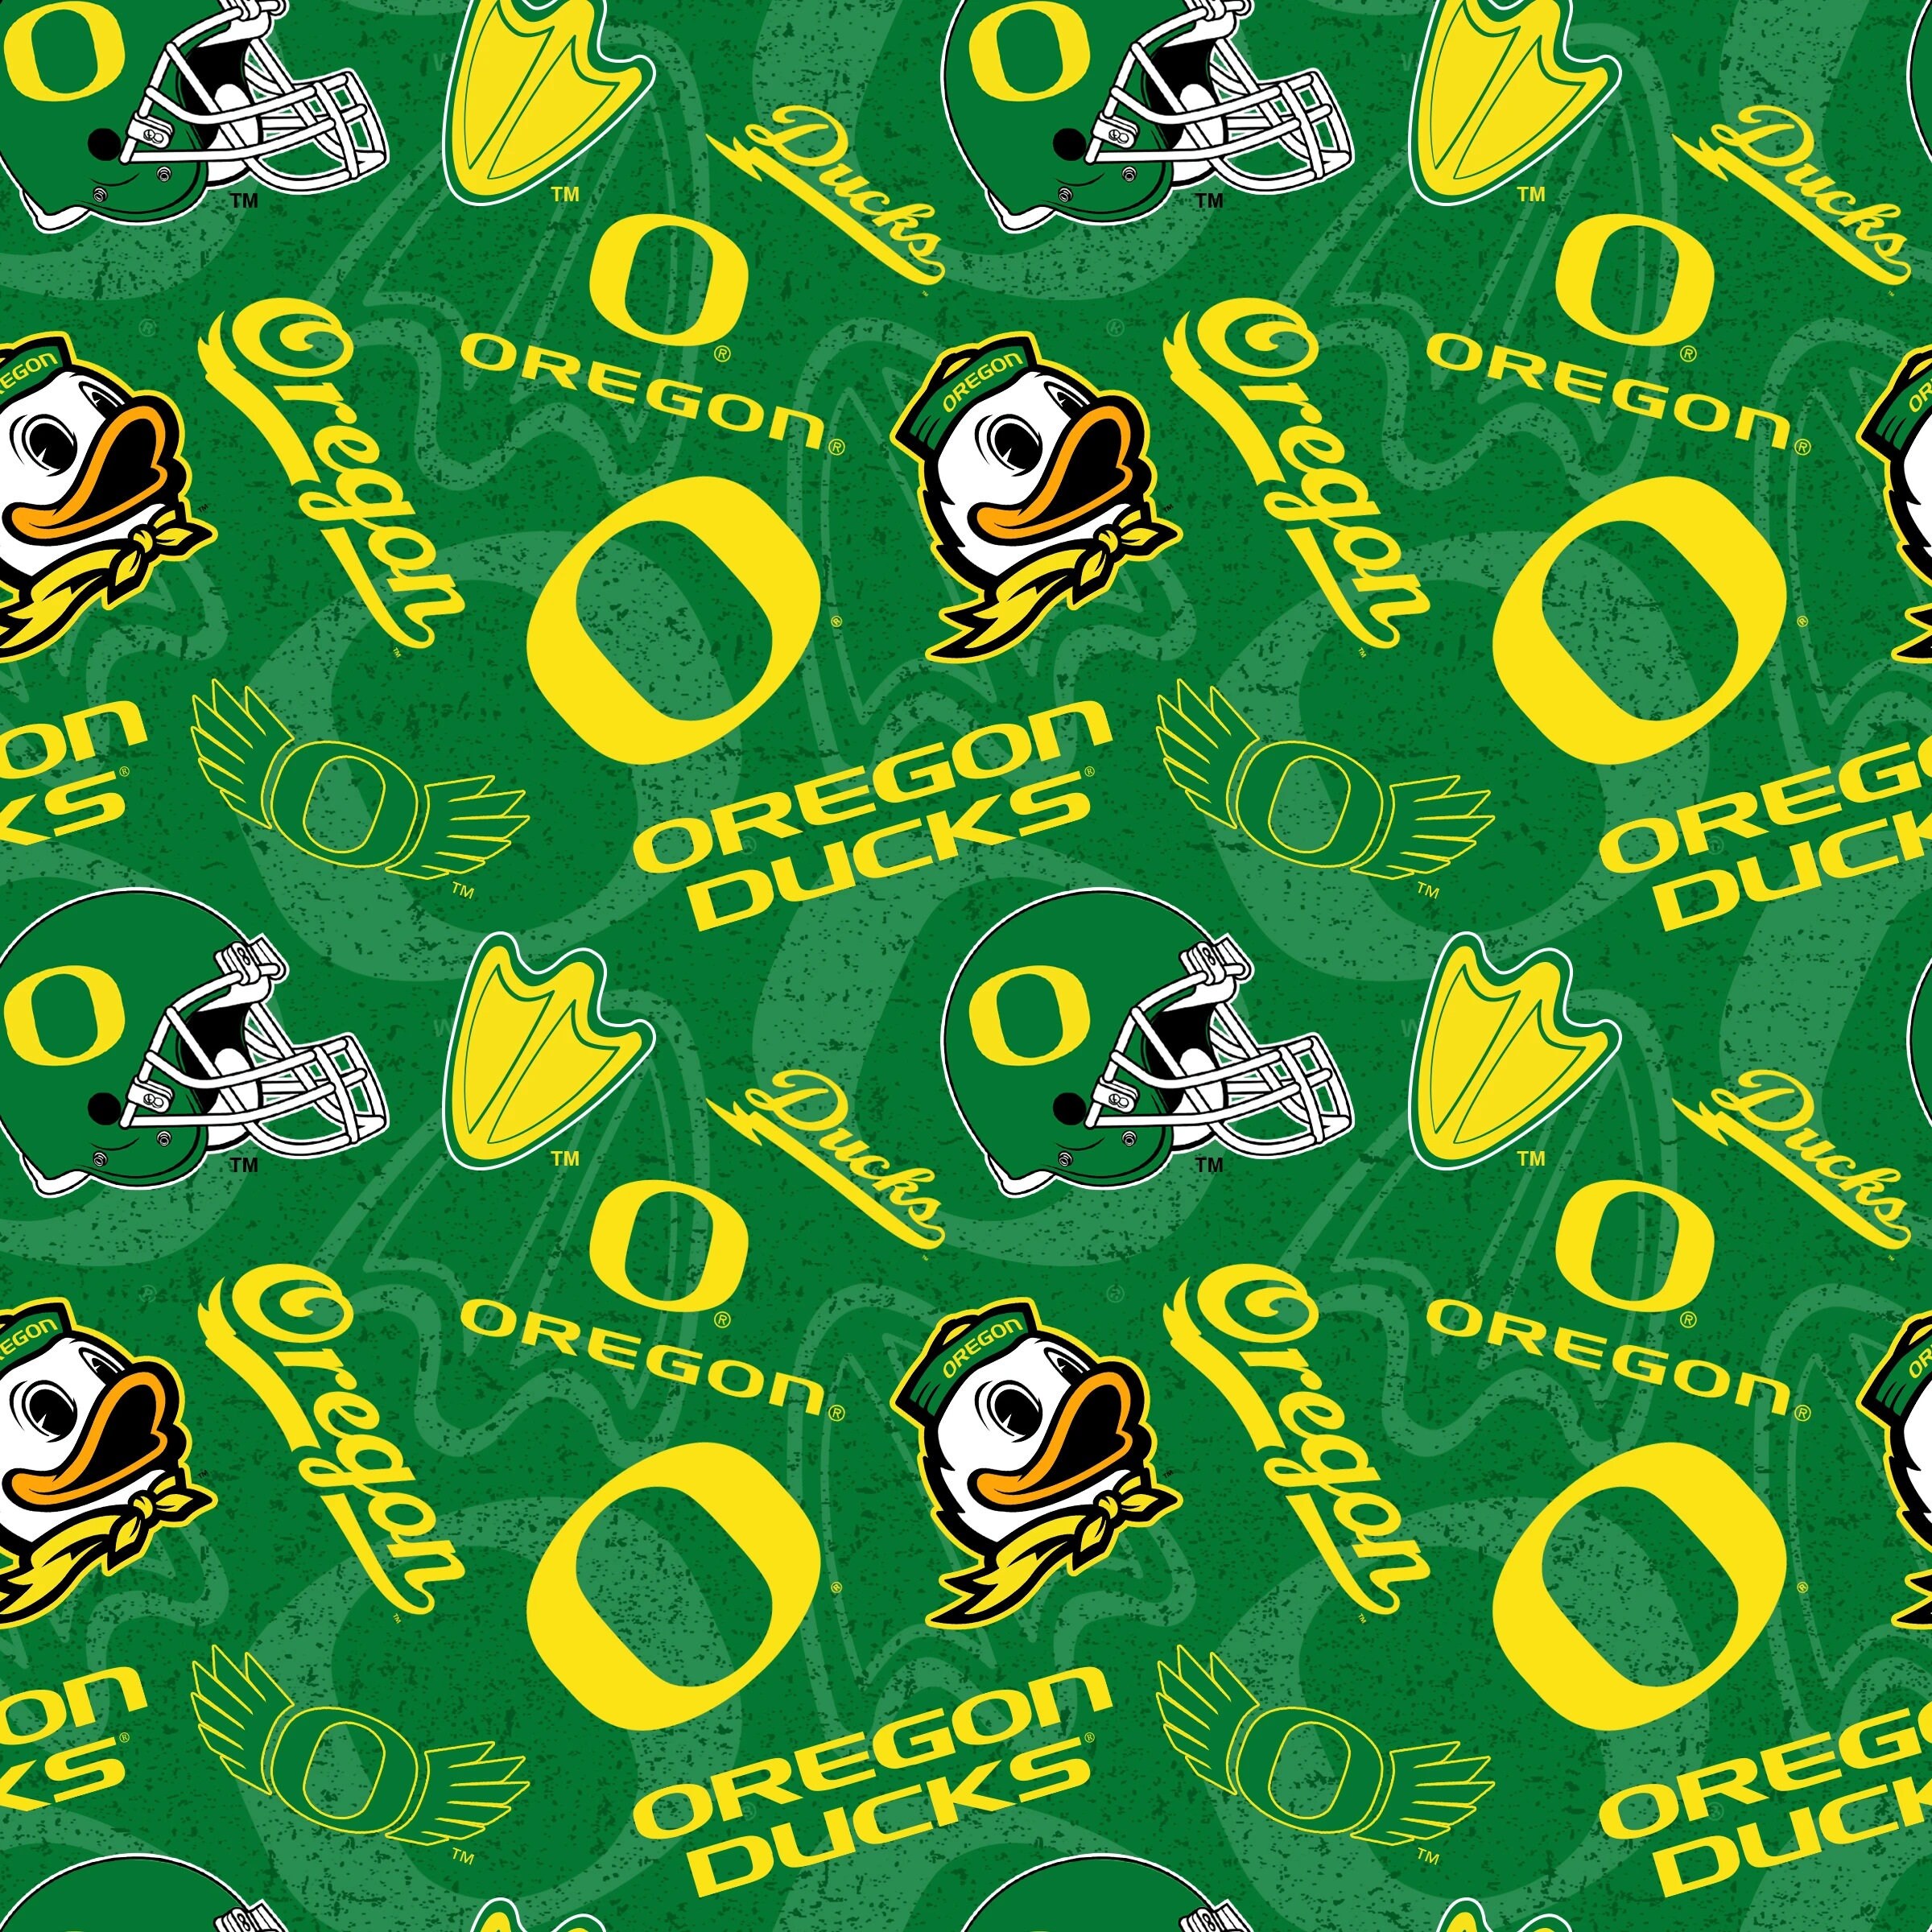 Oregon Ducks Hockey on X: The boys are headed to REGIONALS. Game